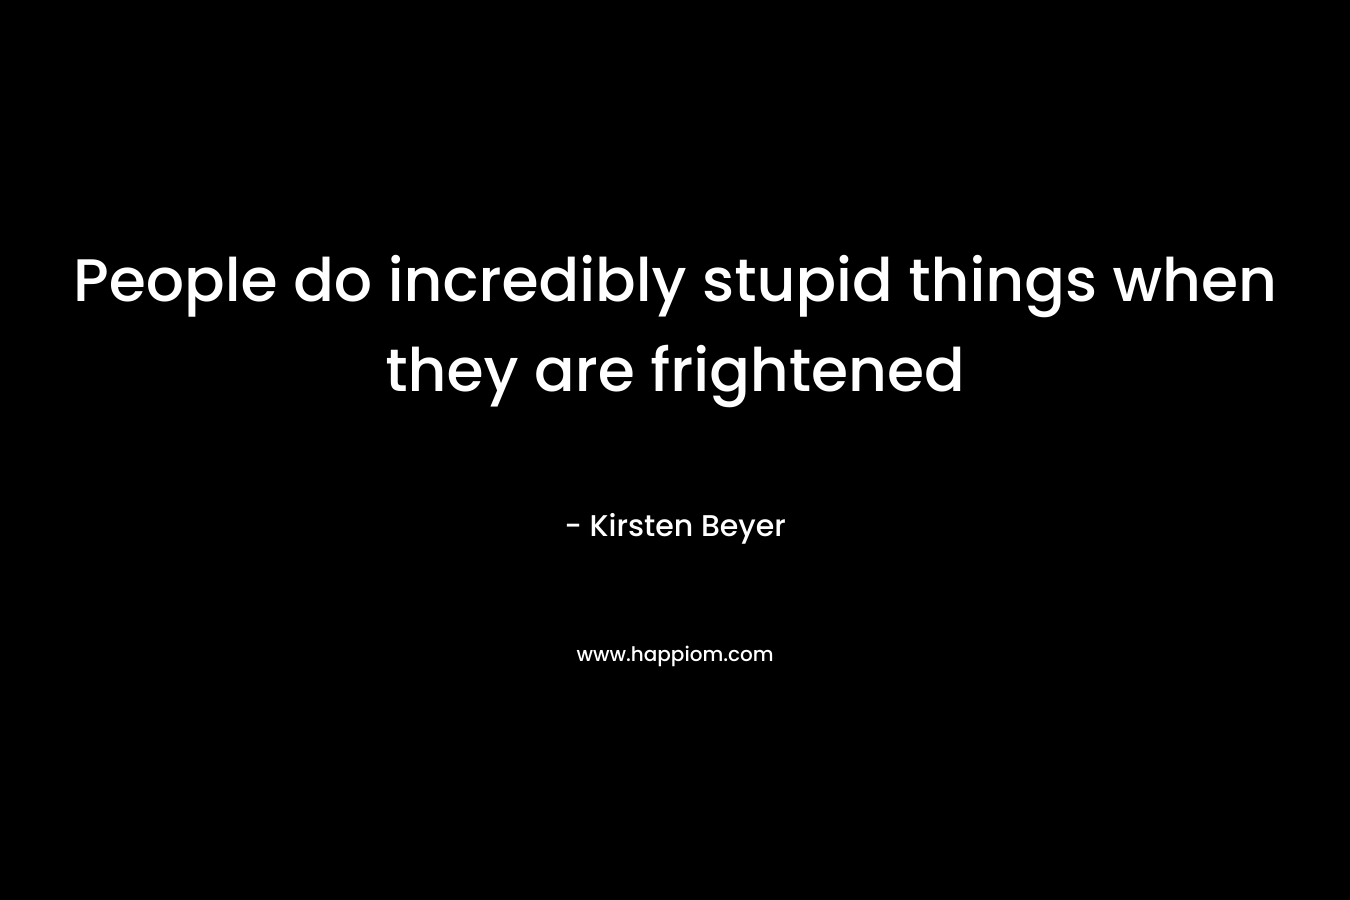 People do incredibly stupid things when they are frightened